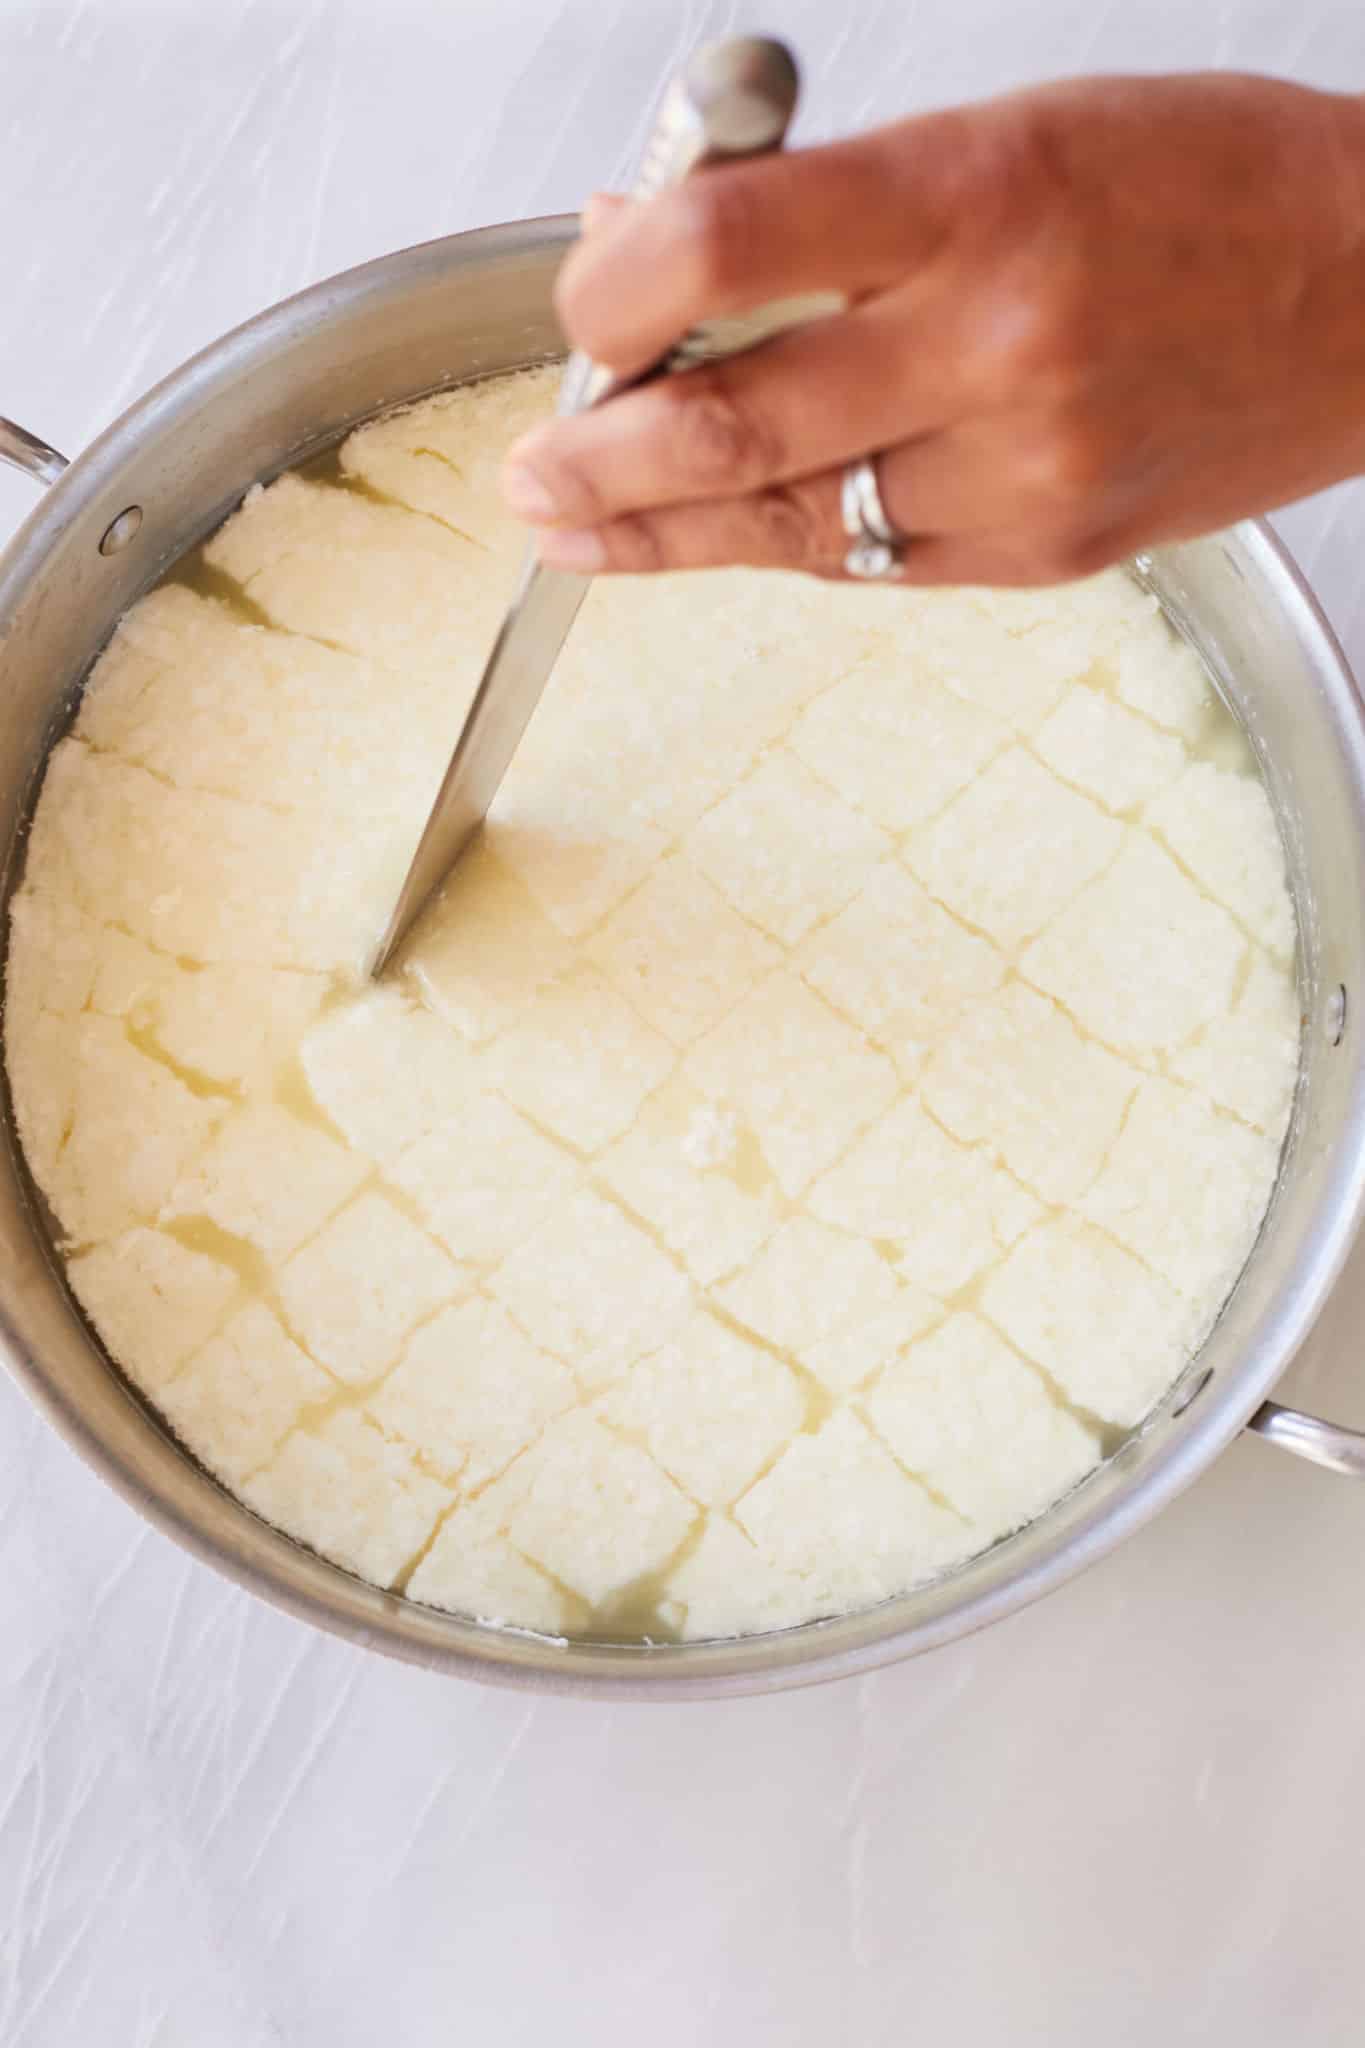 Step-by-step instructions on How to Make Homemade Mozzarella Cheese: Using a large knife, cut the curd all the way to the bottom of the pot in roughly 1-inch (2½-cm) strips. Then cut in the opposite direction to make a grid pattern.